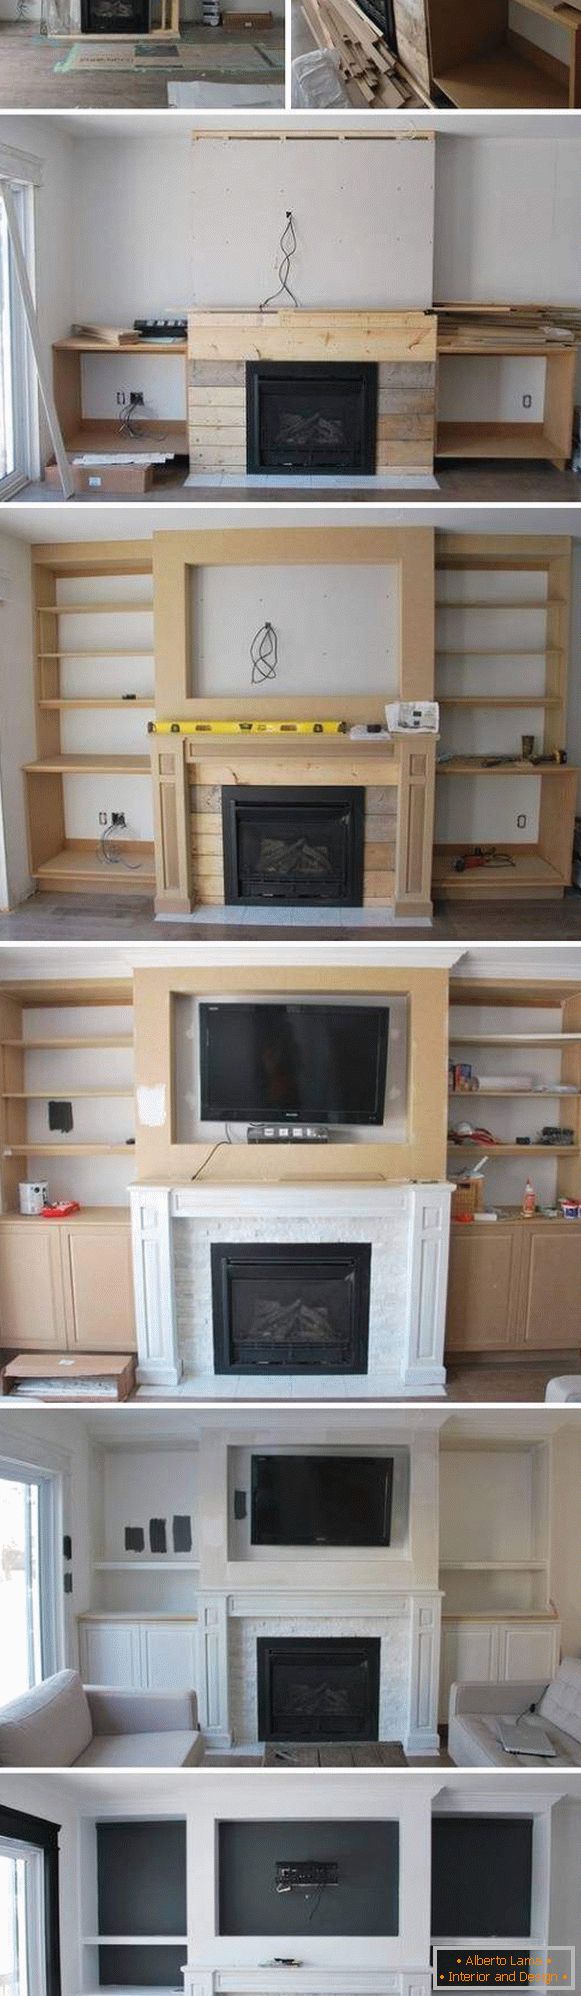 Furniture for a fireplace by yourself - step by step photo